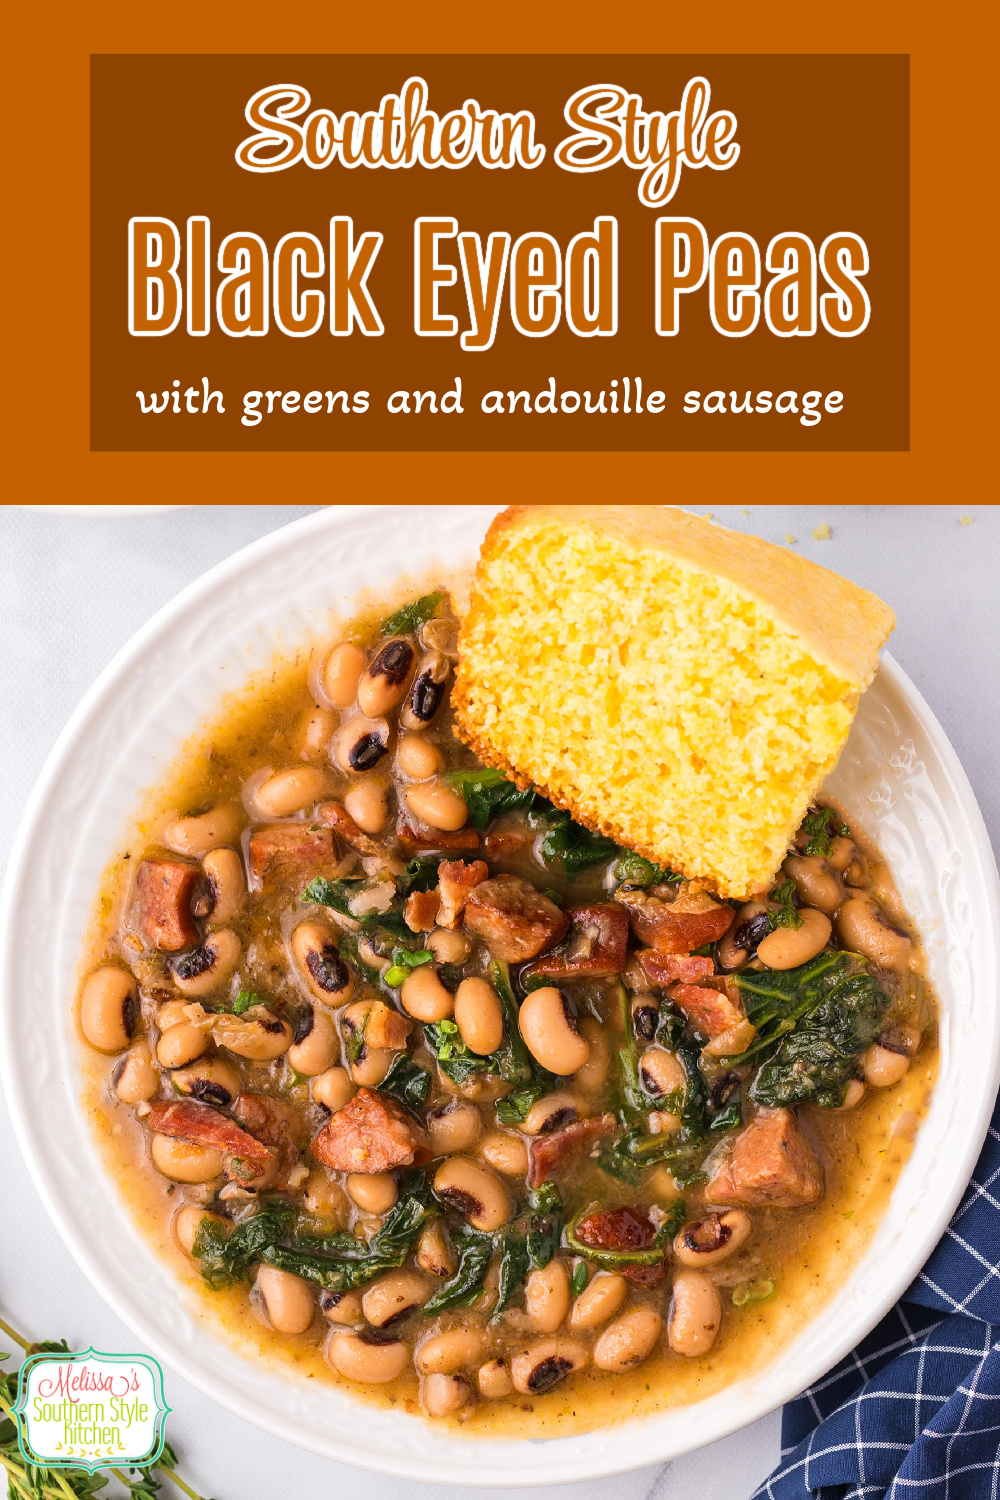 This Southern Black Eyed Peas recipe is a flavor packed dish that the family will love for New Year's Day and year-round #blackeyedpeas #newyearsrecipes #southernpeas #southernblackeyedpeas #recipesforblackeyedpeas #easyblackeyedpeasrecipe